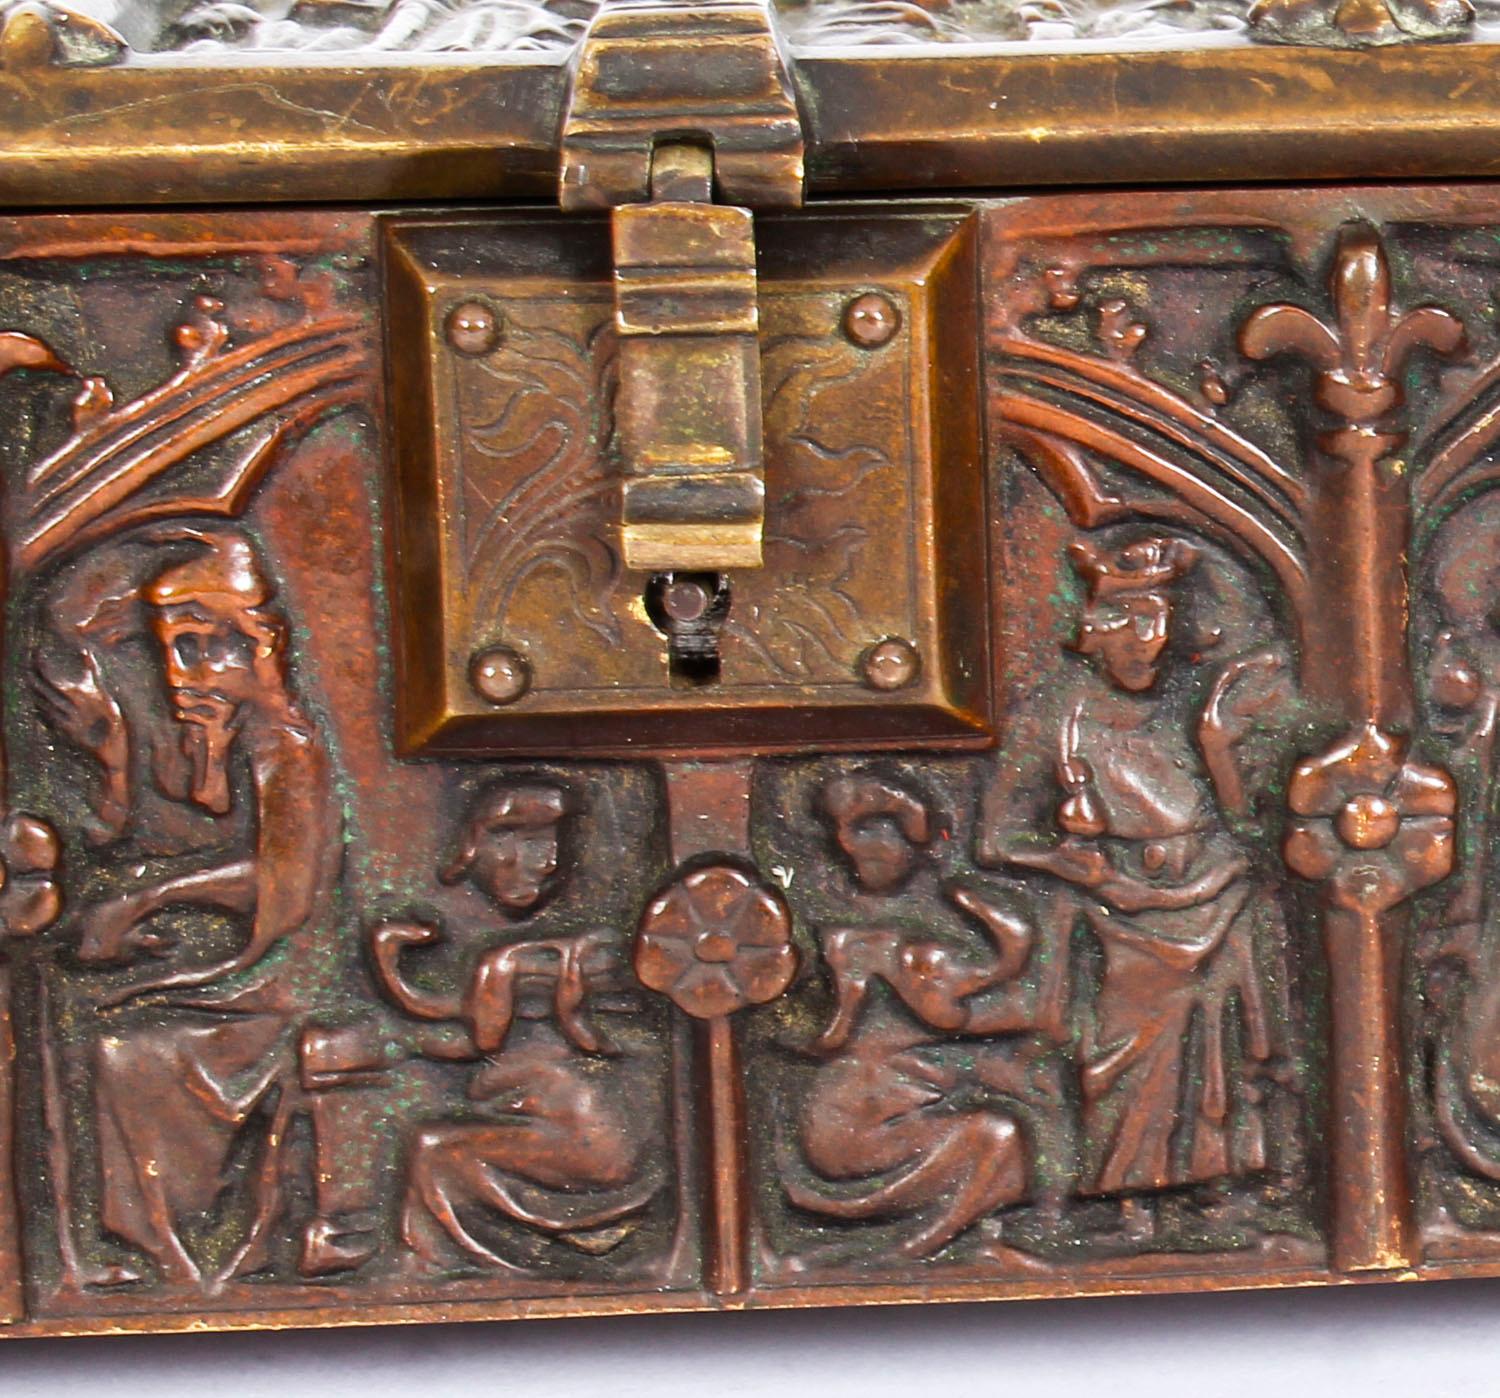 This is a magnificent exceptional quality antique Gothic Revival religious ecclesiastical bronze casket / jewellery box, bearing the makers mark on the underside, AFC in a hexagon, for Adolph Frankau & Co, London, and circa 1880 in date.

This